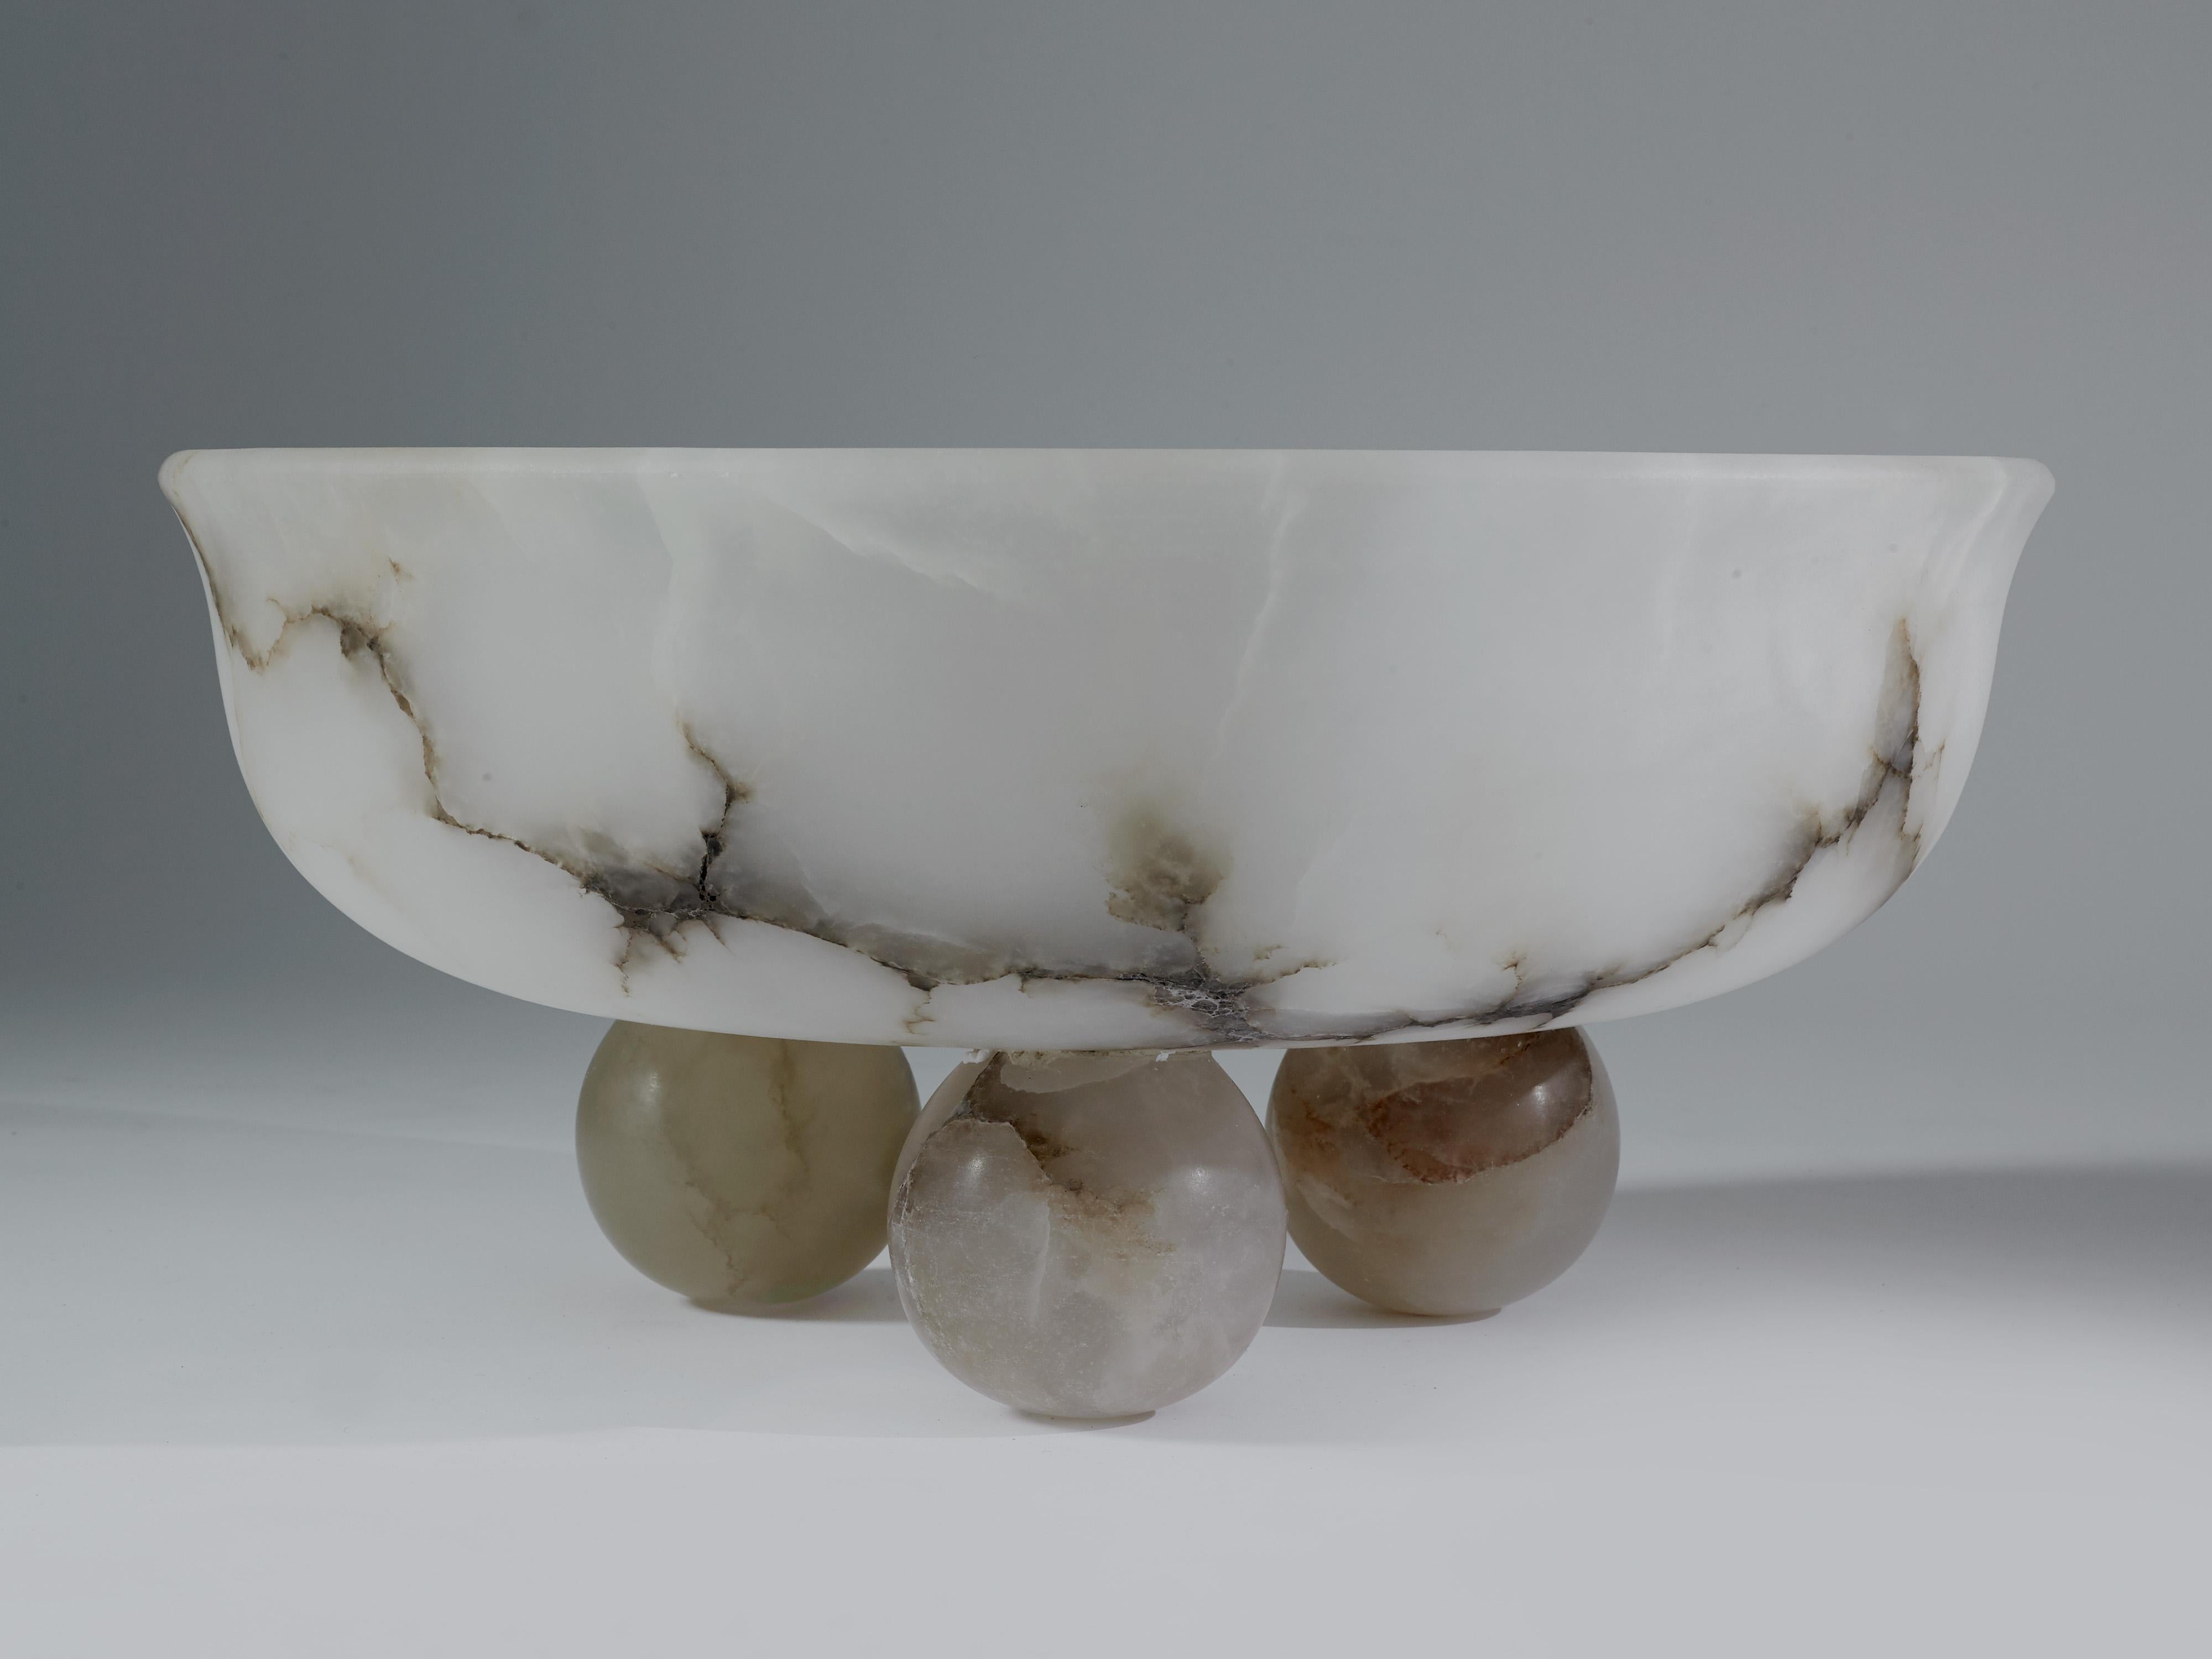 Very impressive large bowl carved from the purest alabaster found in Italy, Inspired by the Mayan clay vessels used in ceremonies by this ancient civilization. 
Made exclusively for Urban Art.
Perfect condition. 
White with gray veined alabaster.